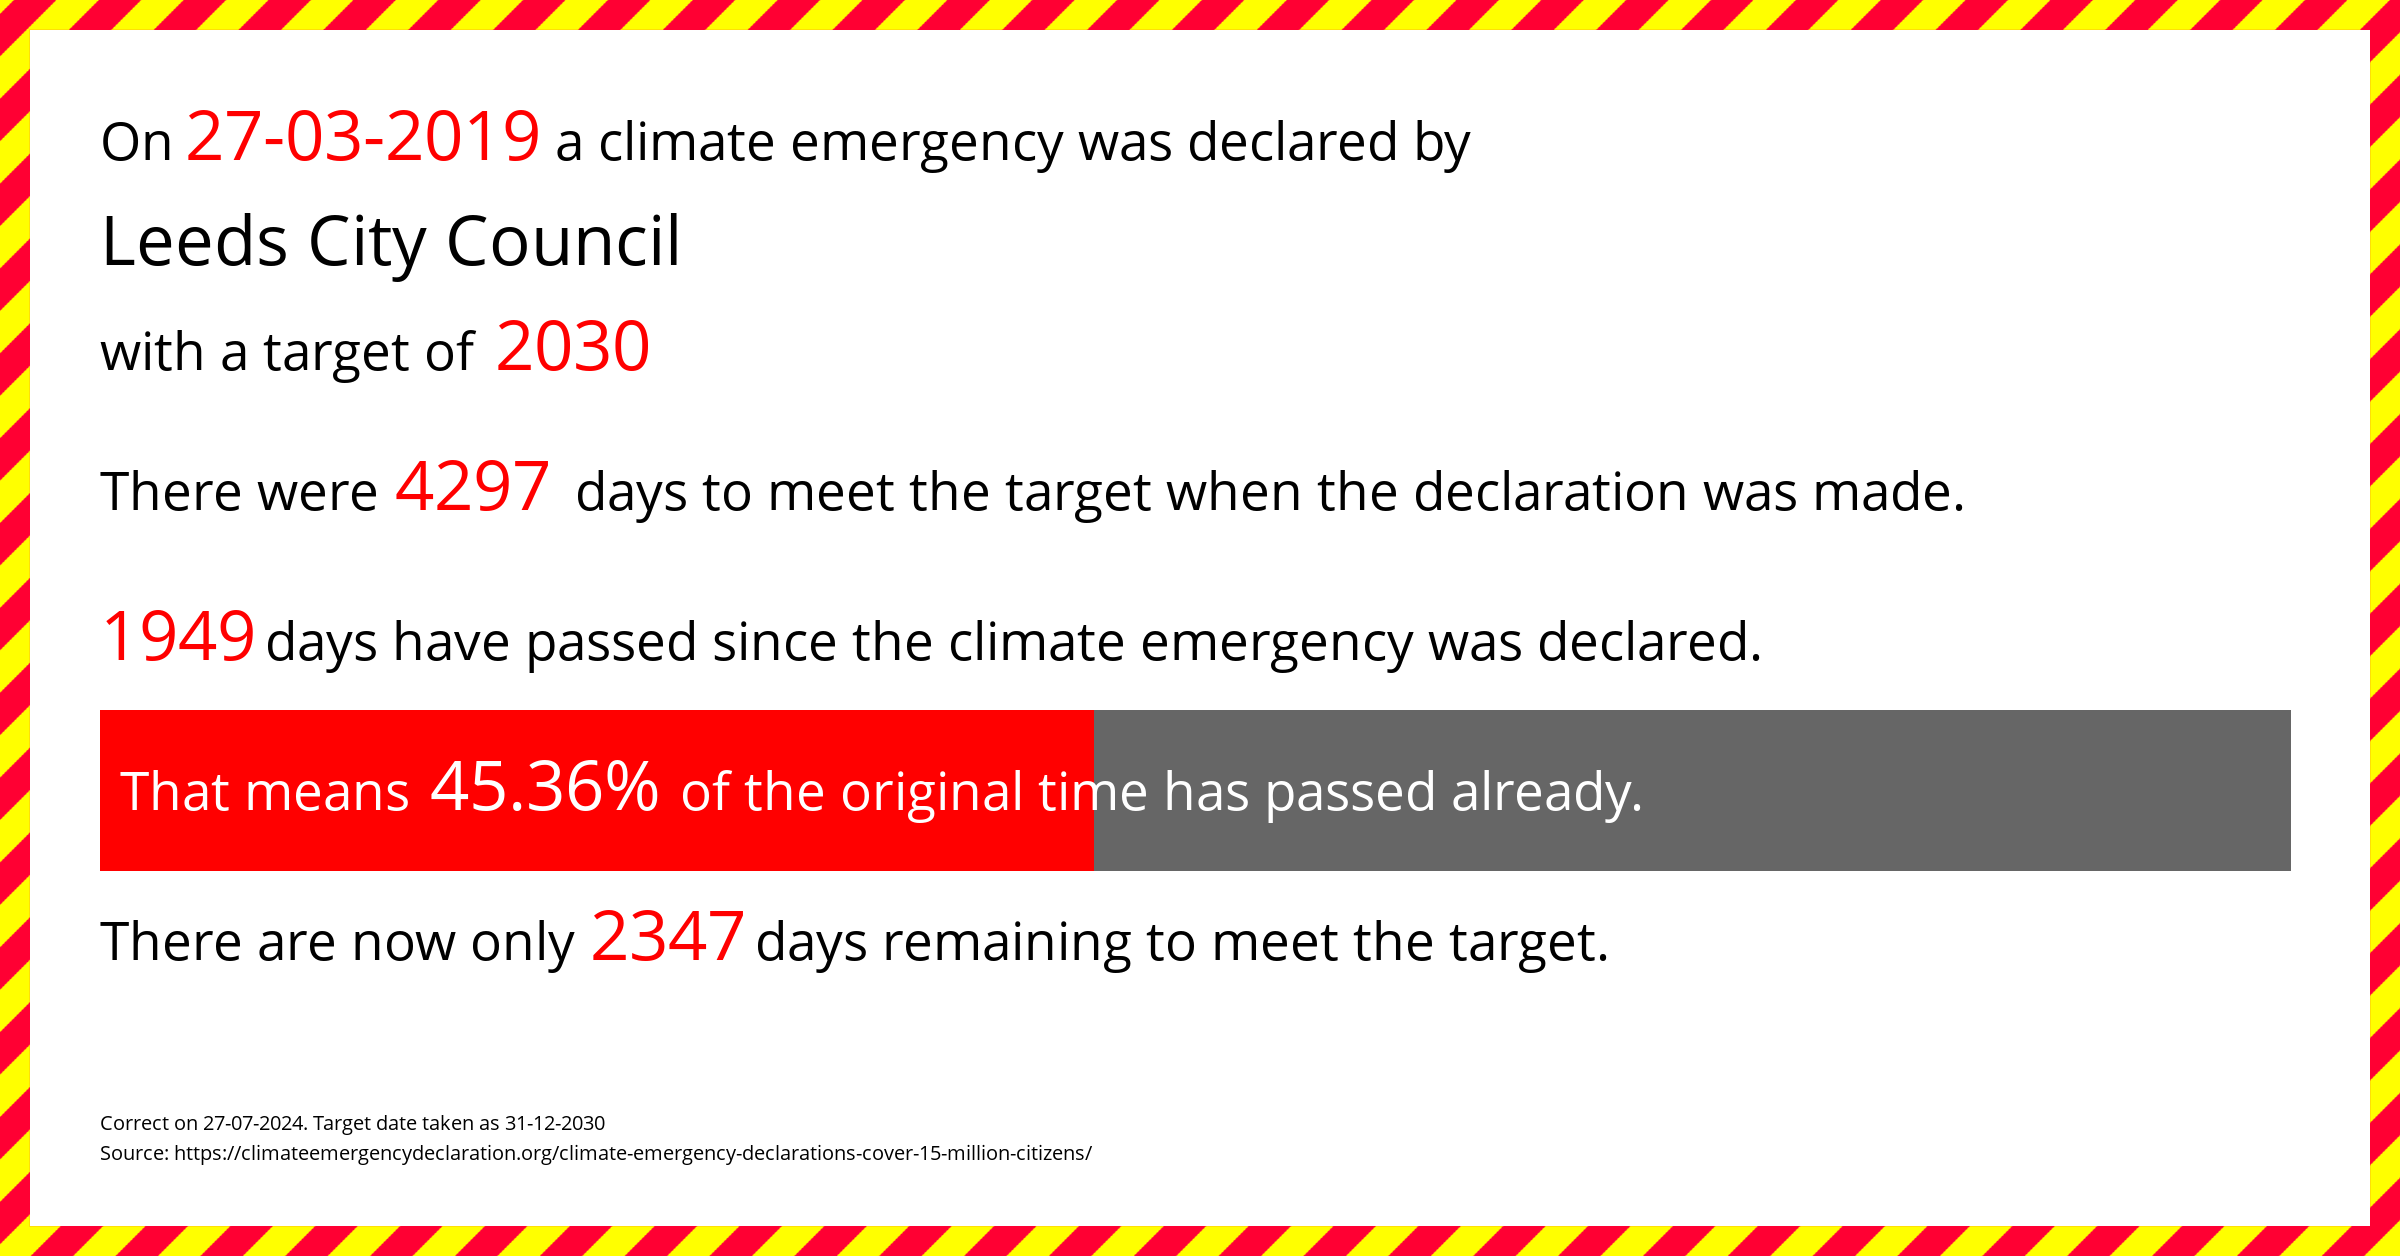 Leeds City Council declared a Climate emergency on Wednesday 27th March 2019, with a target of 2030.